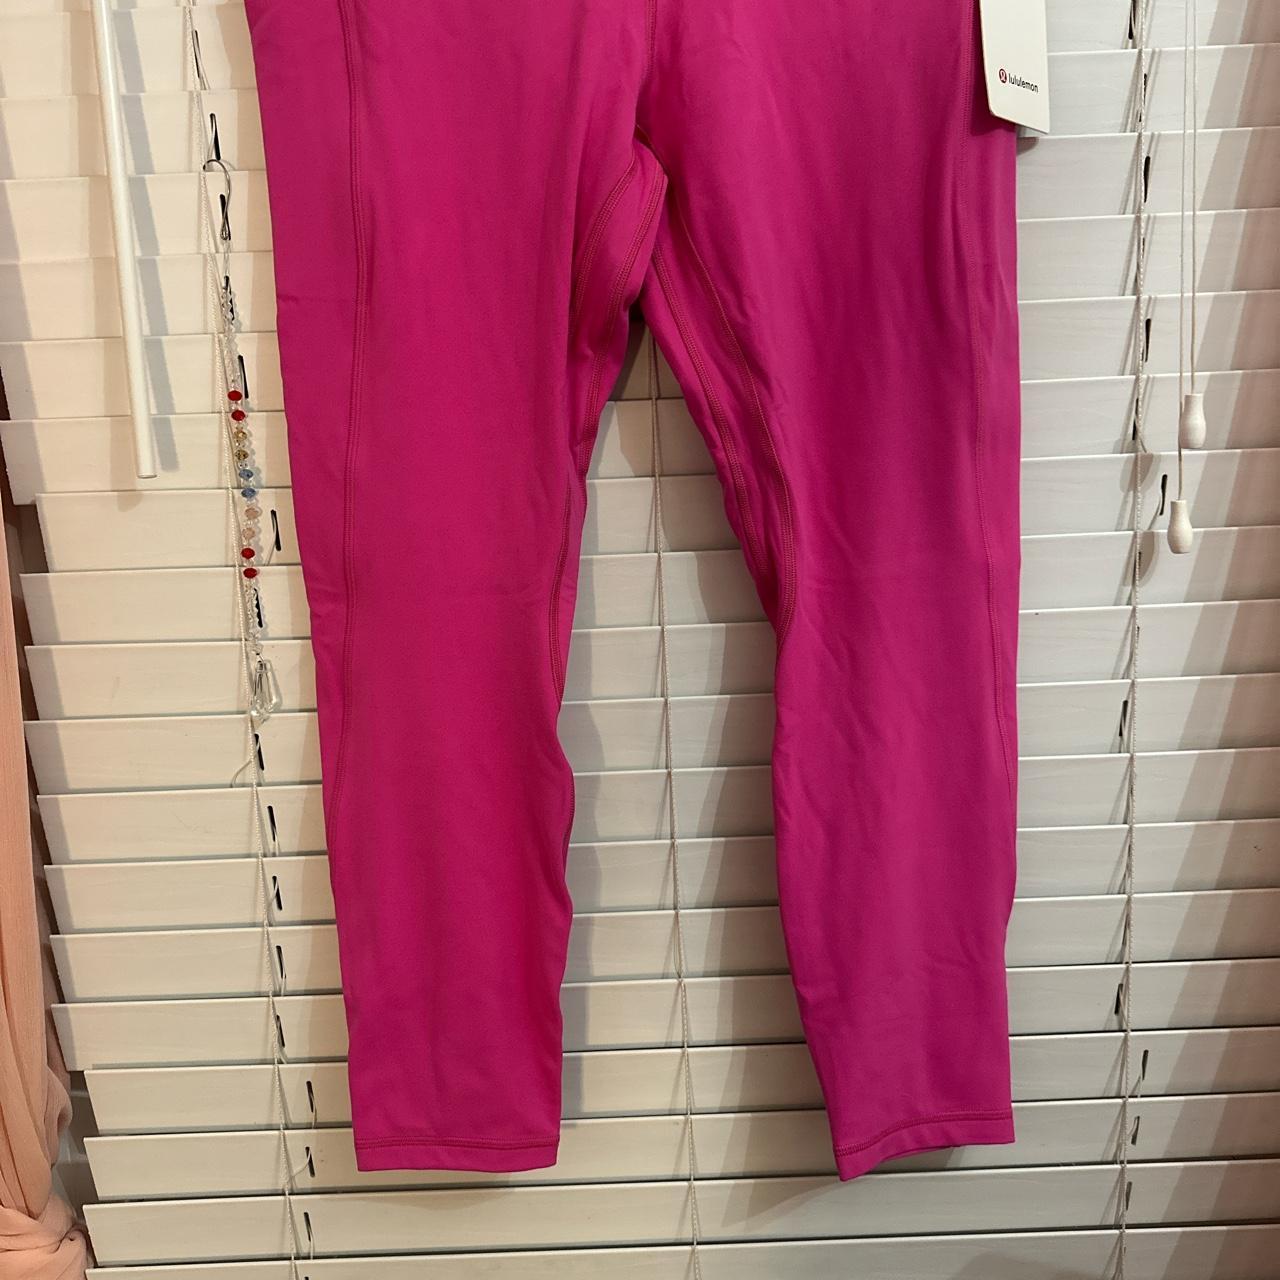 Sonic Pink Lululemon Align Pants 25” Size 12 with